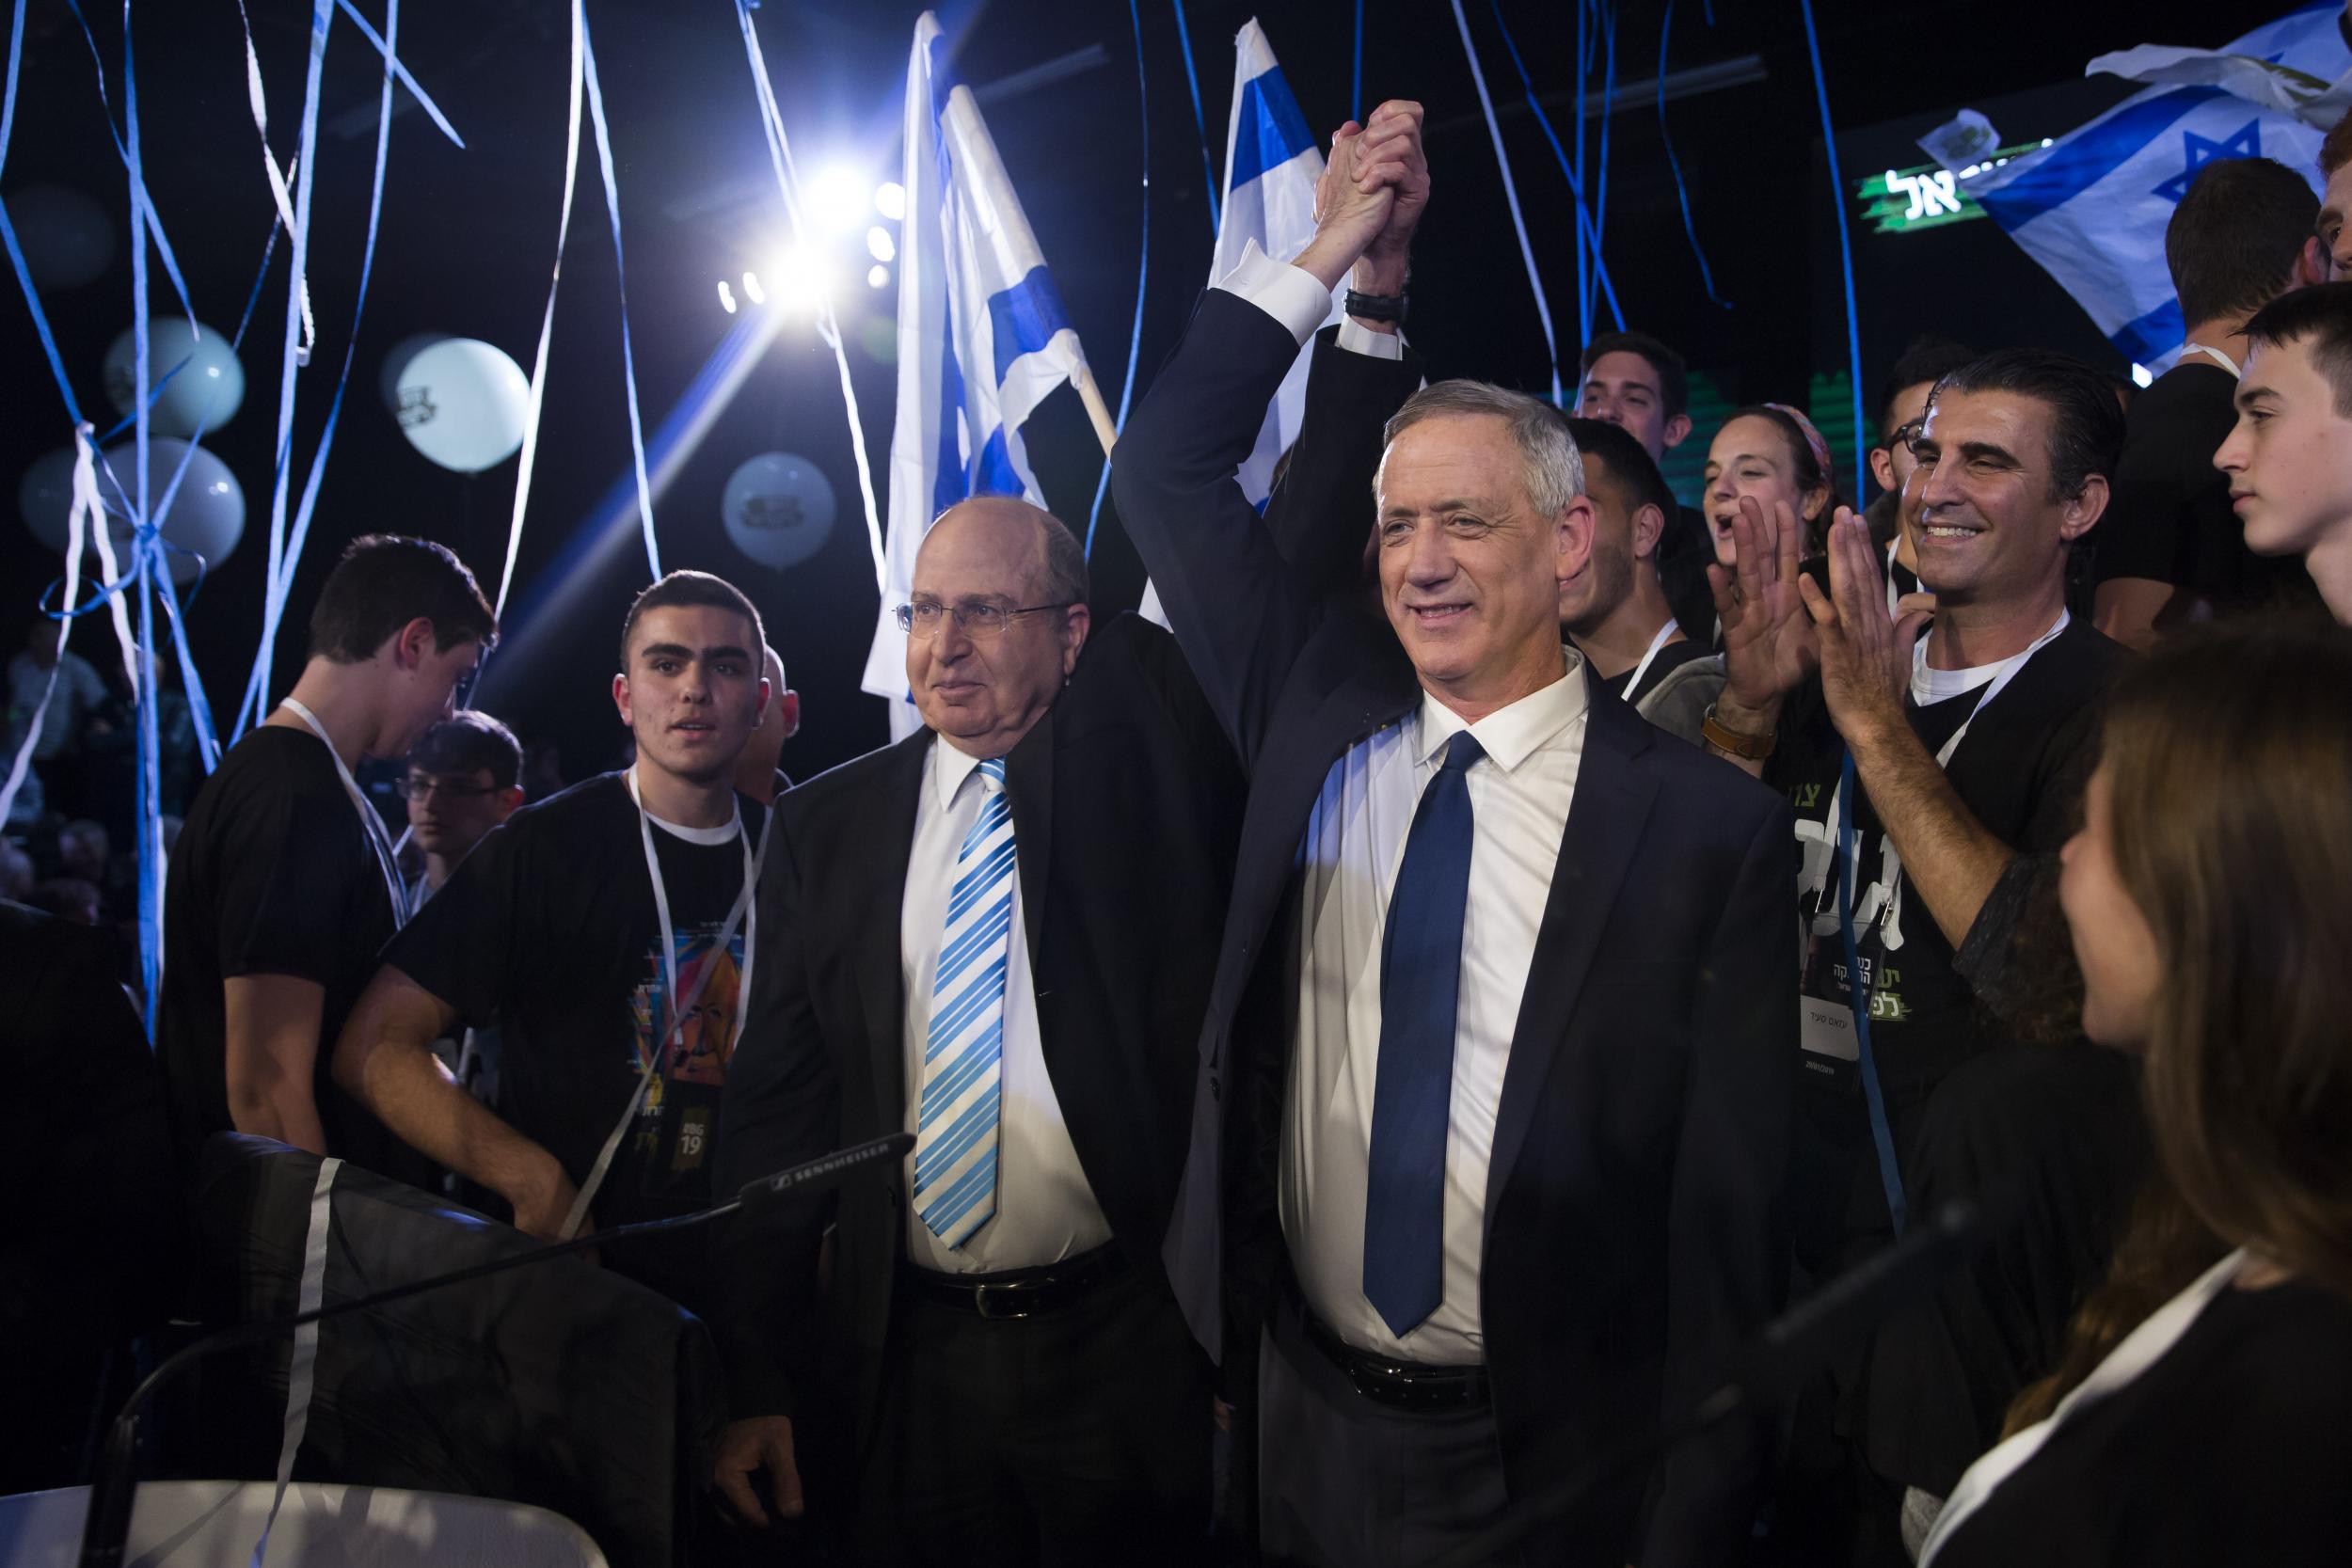 Benny Gantz (right) former minister of defence Moshe Ya’alon gesture supporters during a campaign event (Getty)